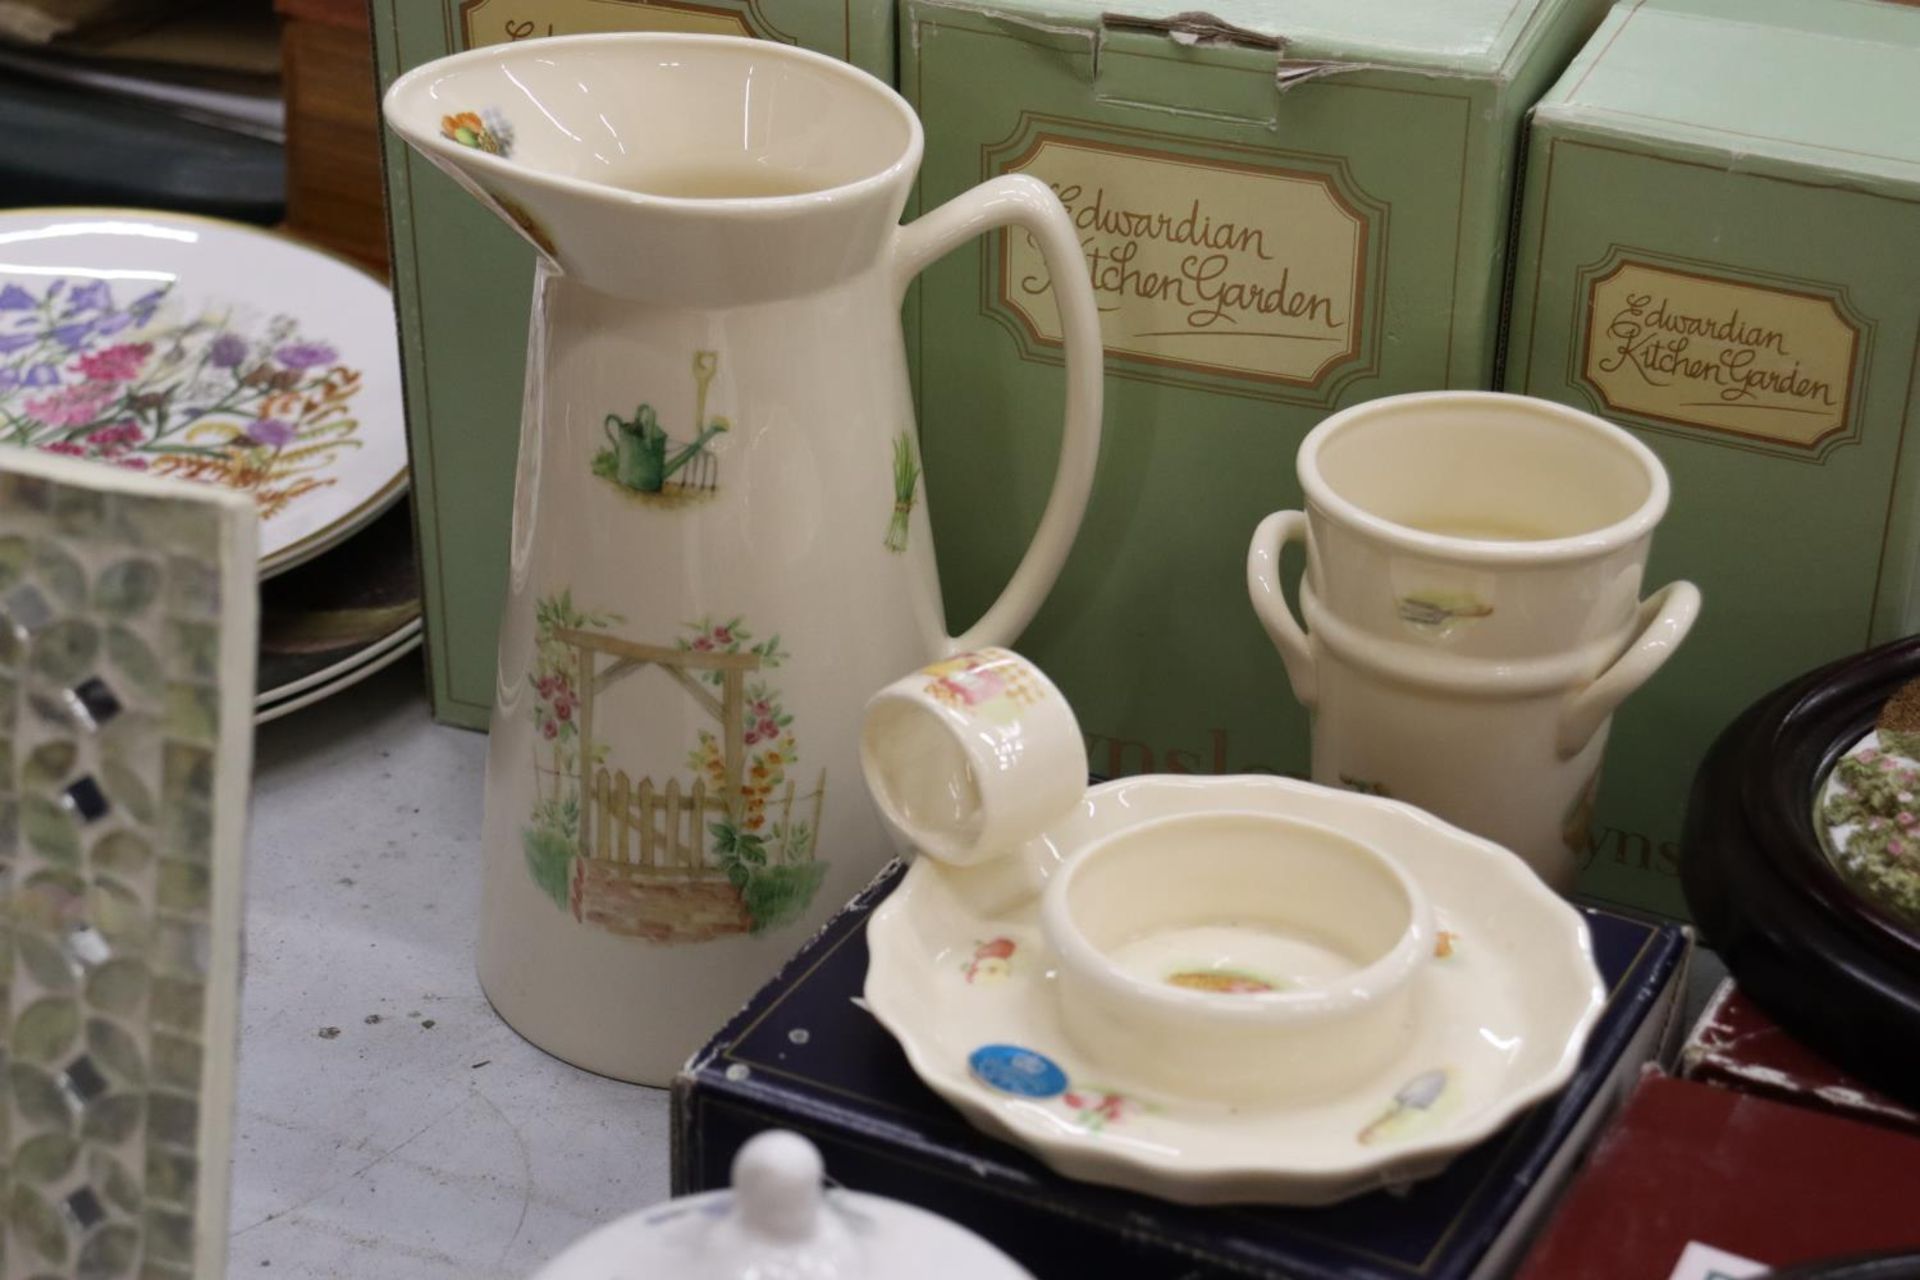 A QUANTITY OF CERAMIC ITEMS, MOSTLY BOXED TO INCLUDE AYNSLEY EDWARDIAN KITCHEN GARDEN, JUG, VASE AND - Image 3 of 10